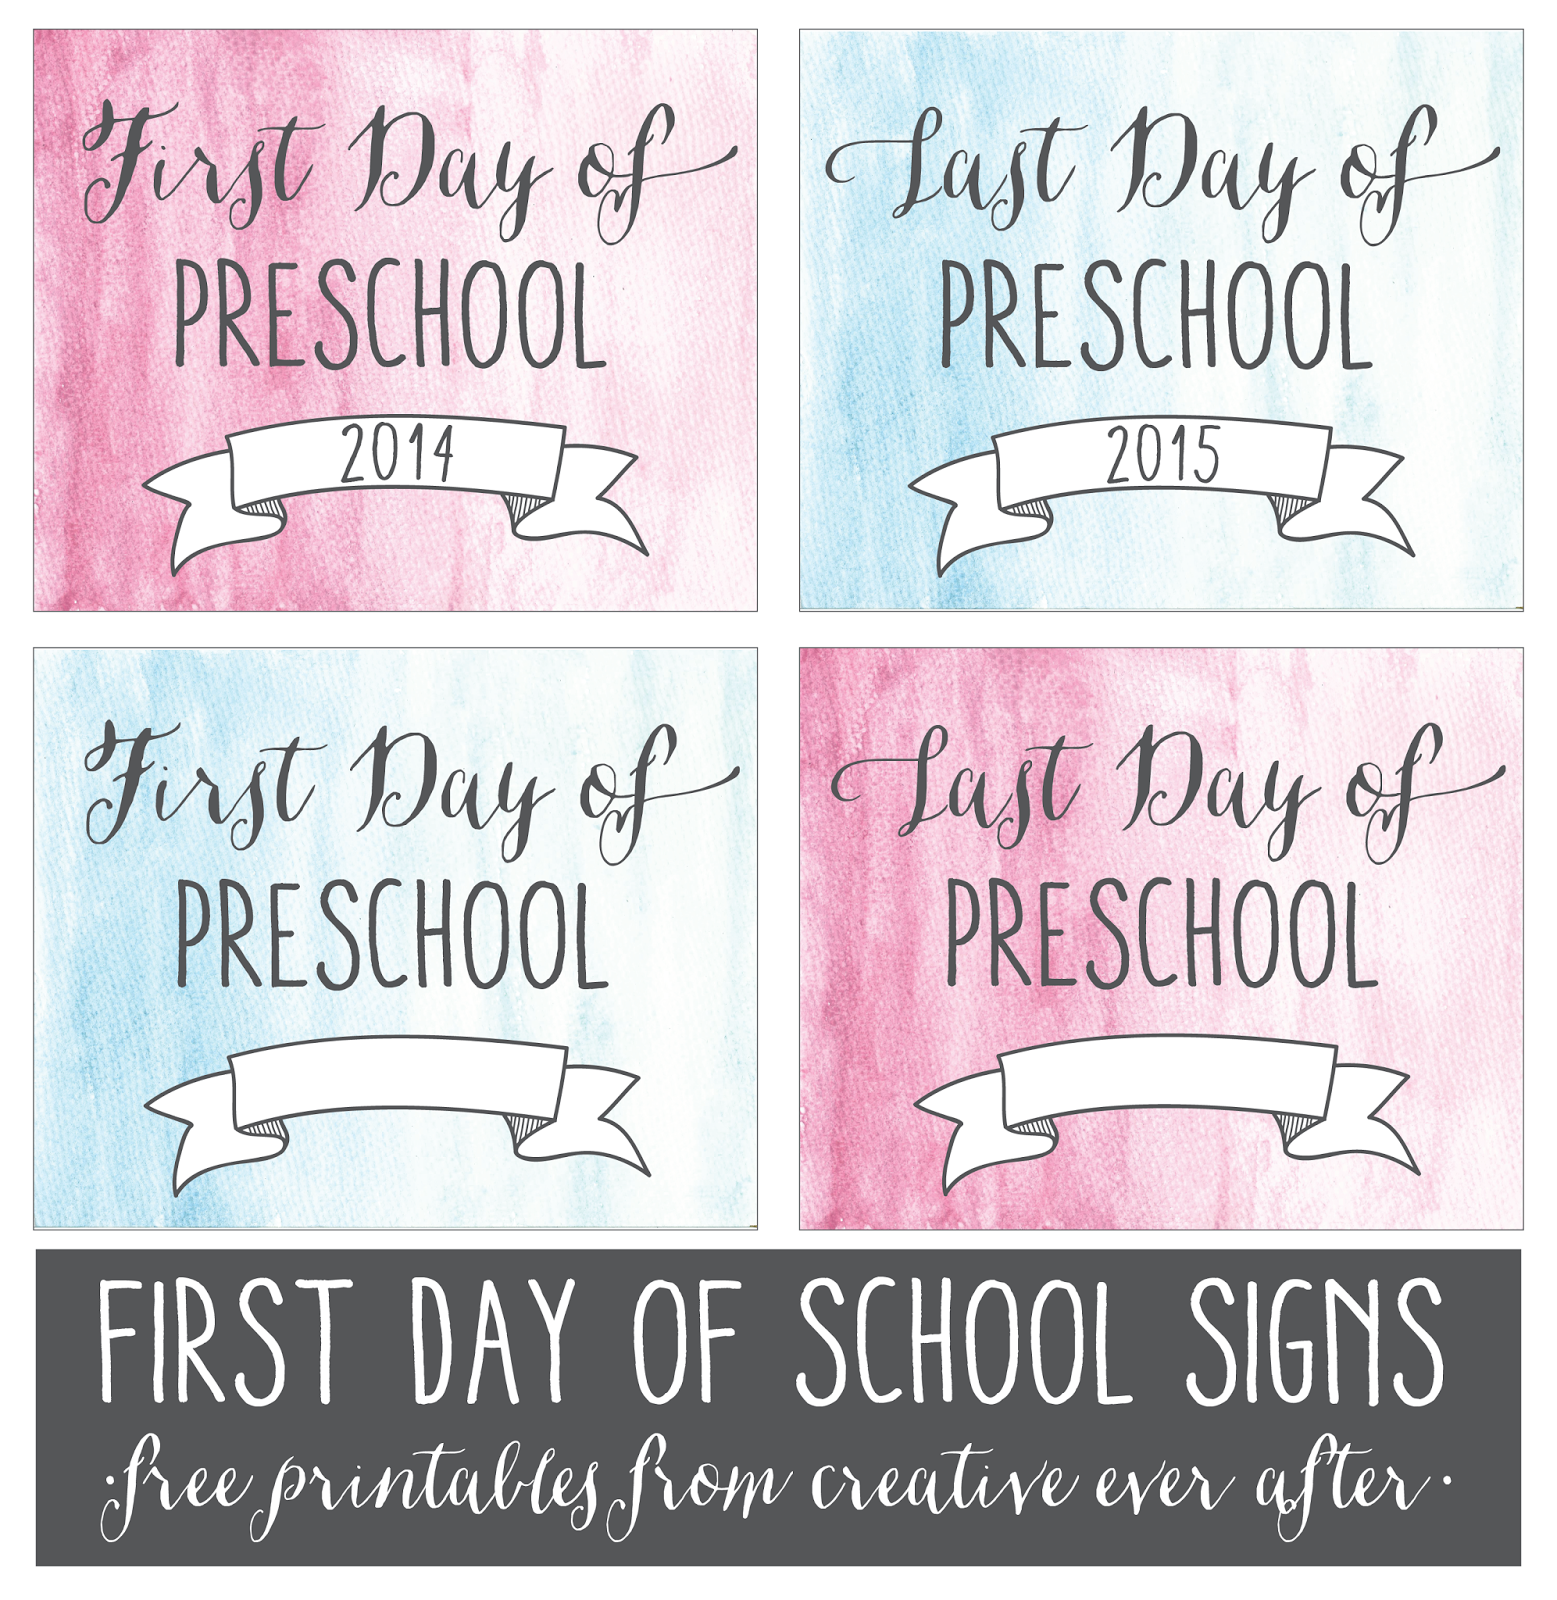 First & Last Day of School Signs - Free Printables